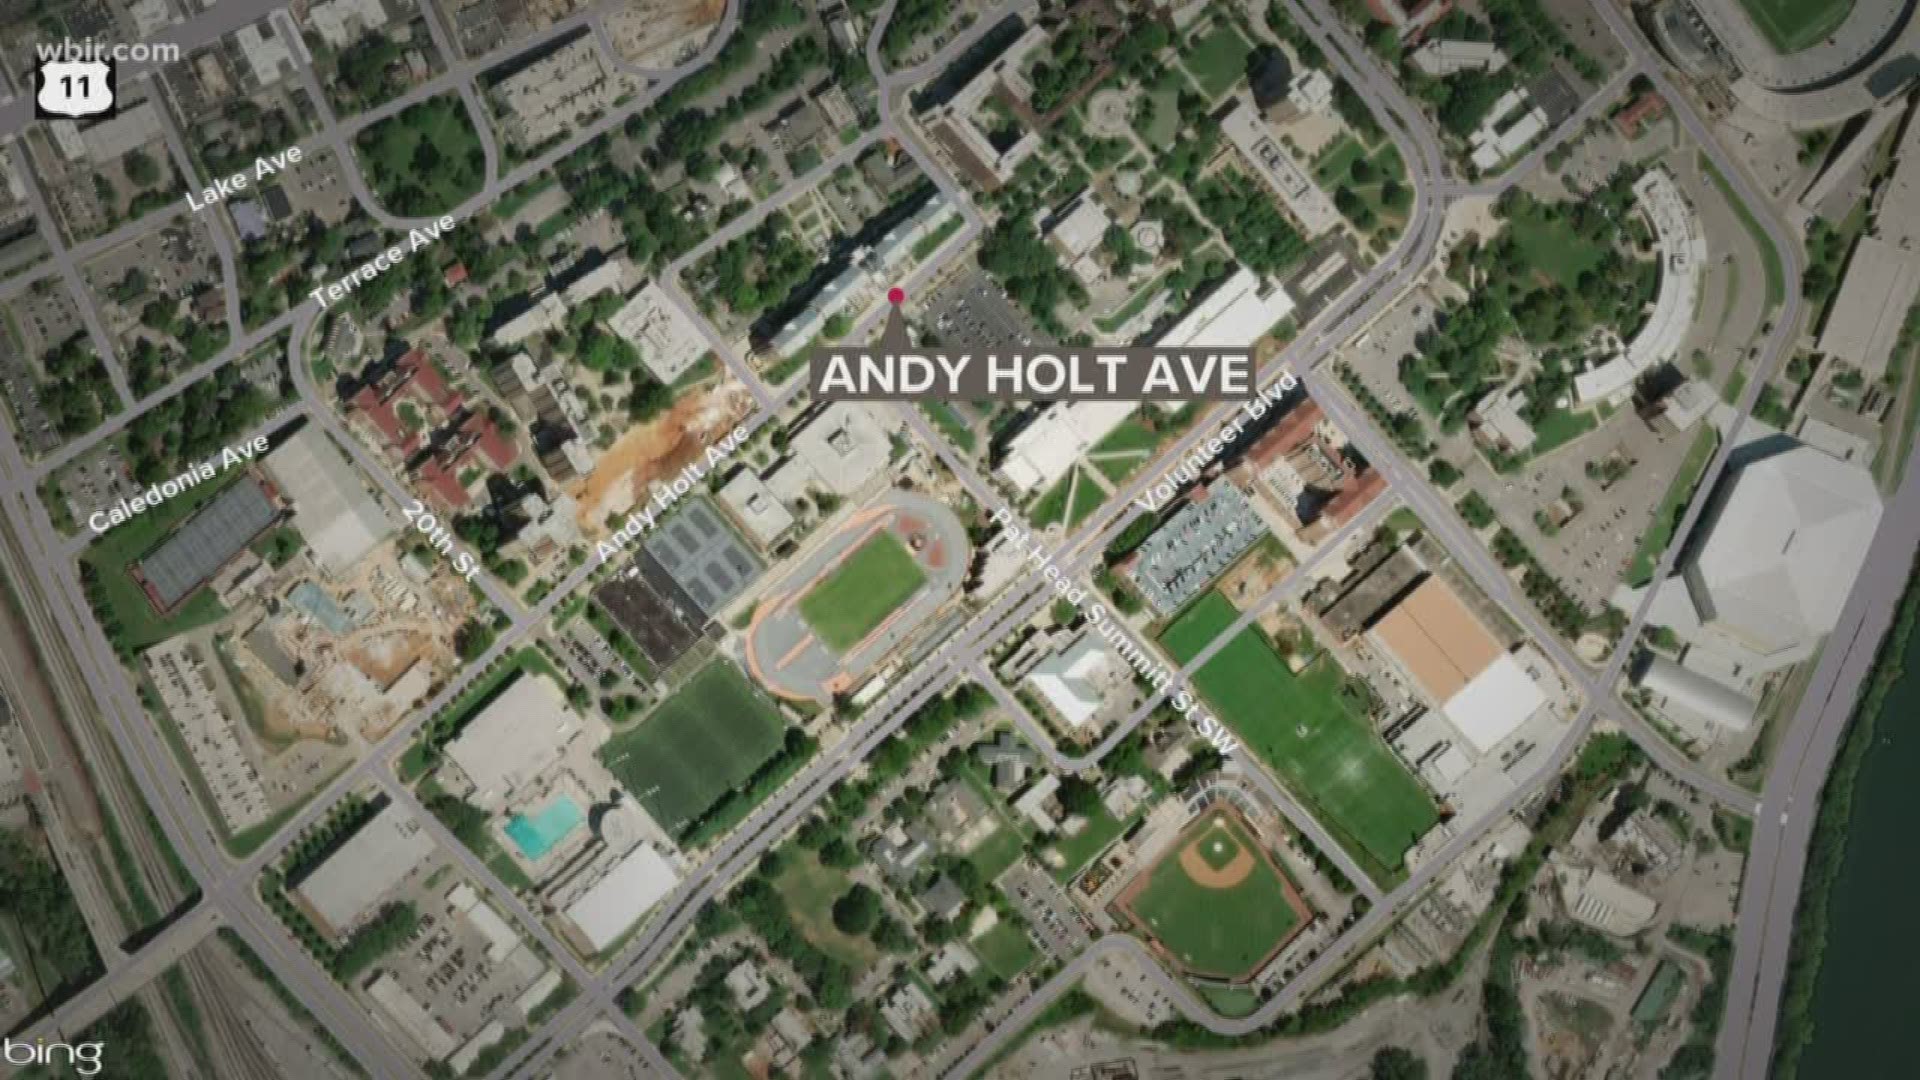 The University of Tennessee plans to close part of Andy Holt Avenue for the project.